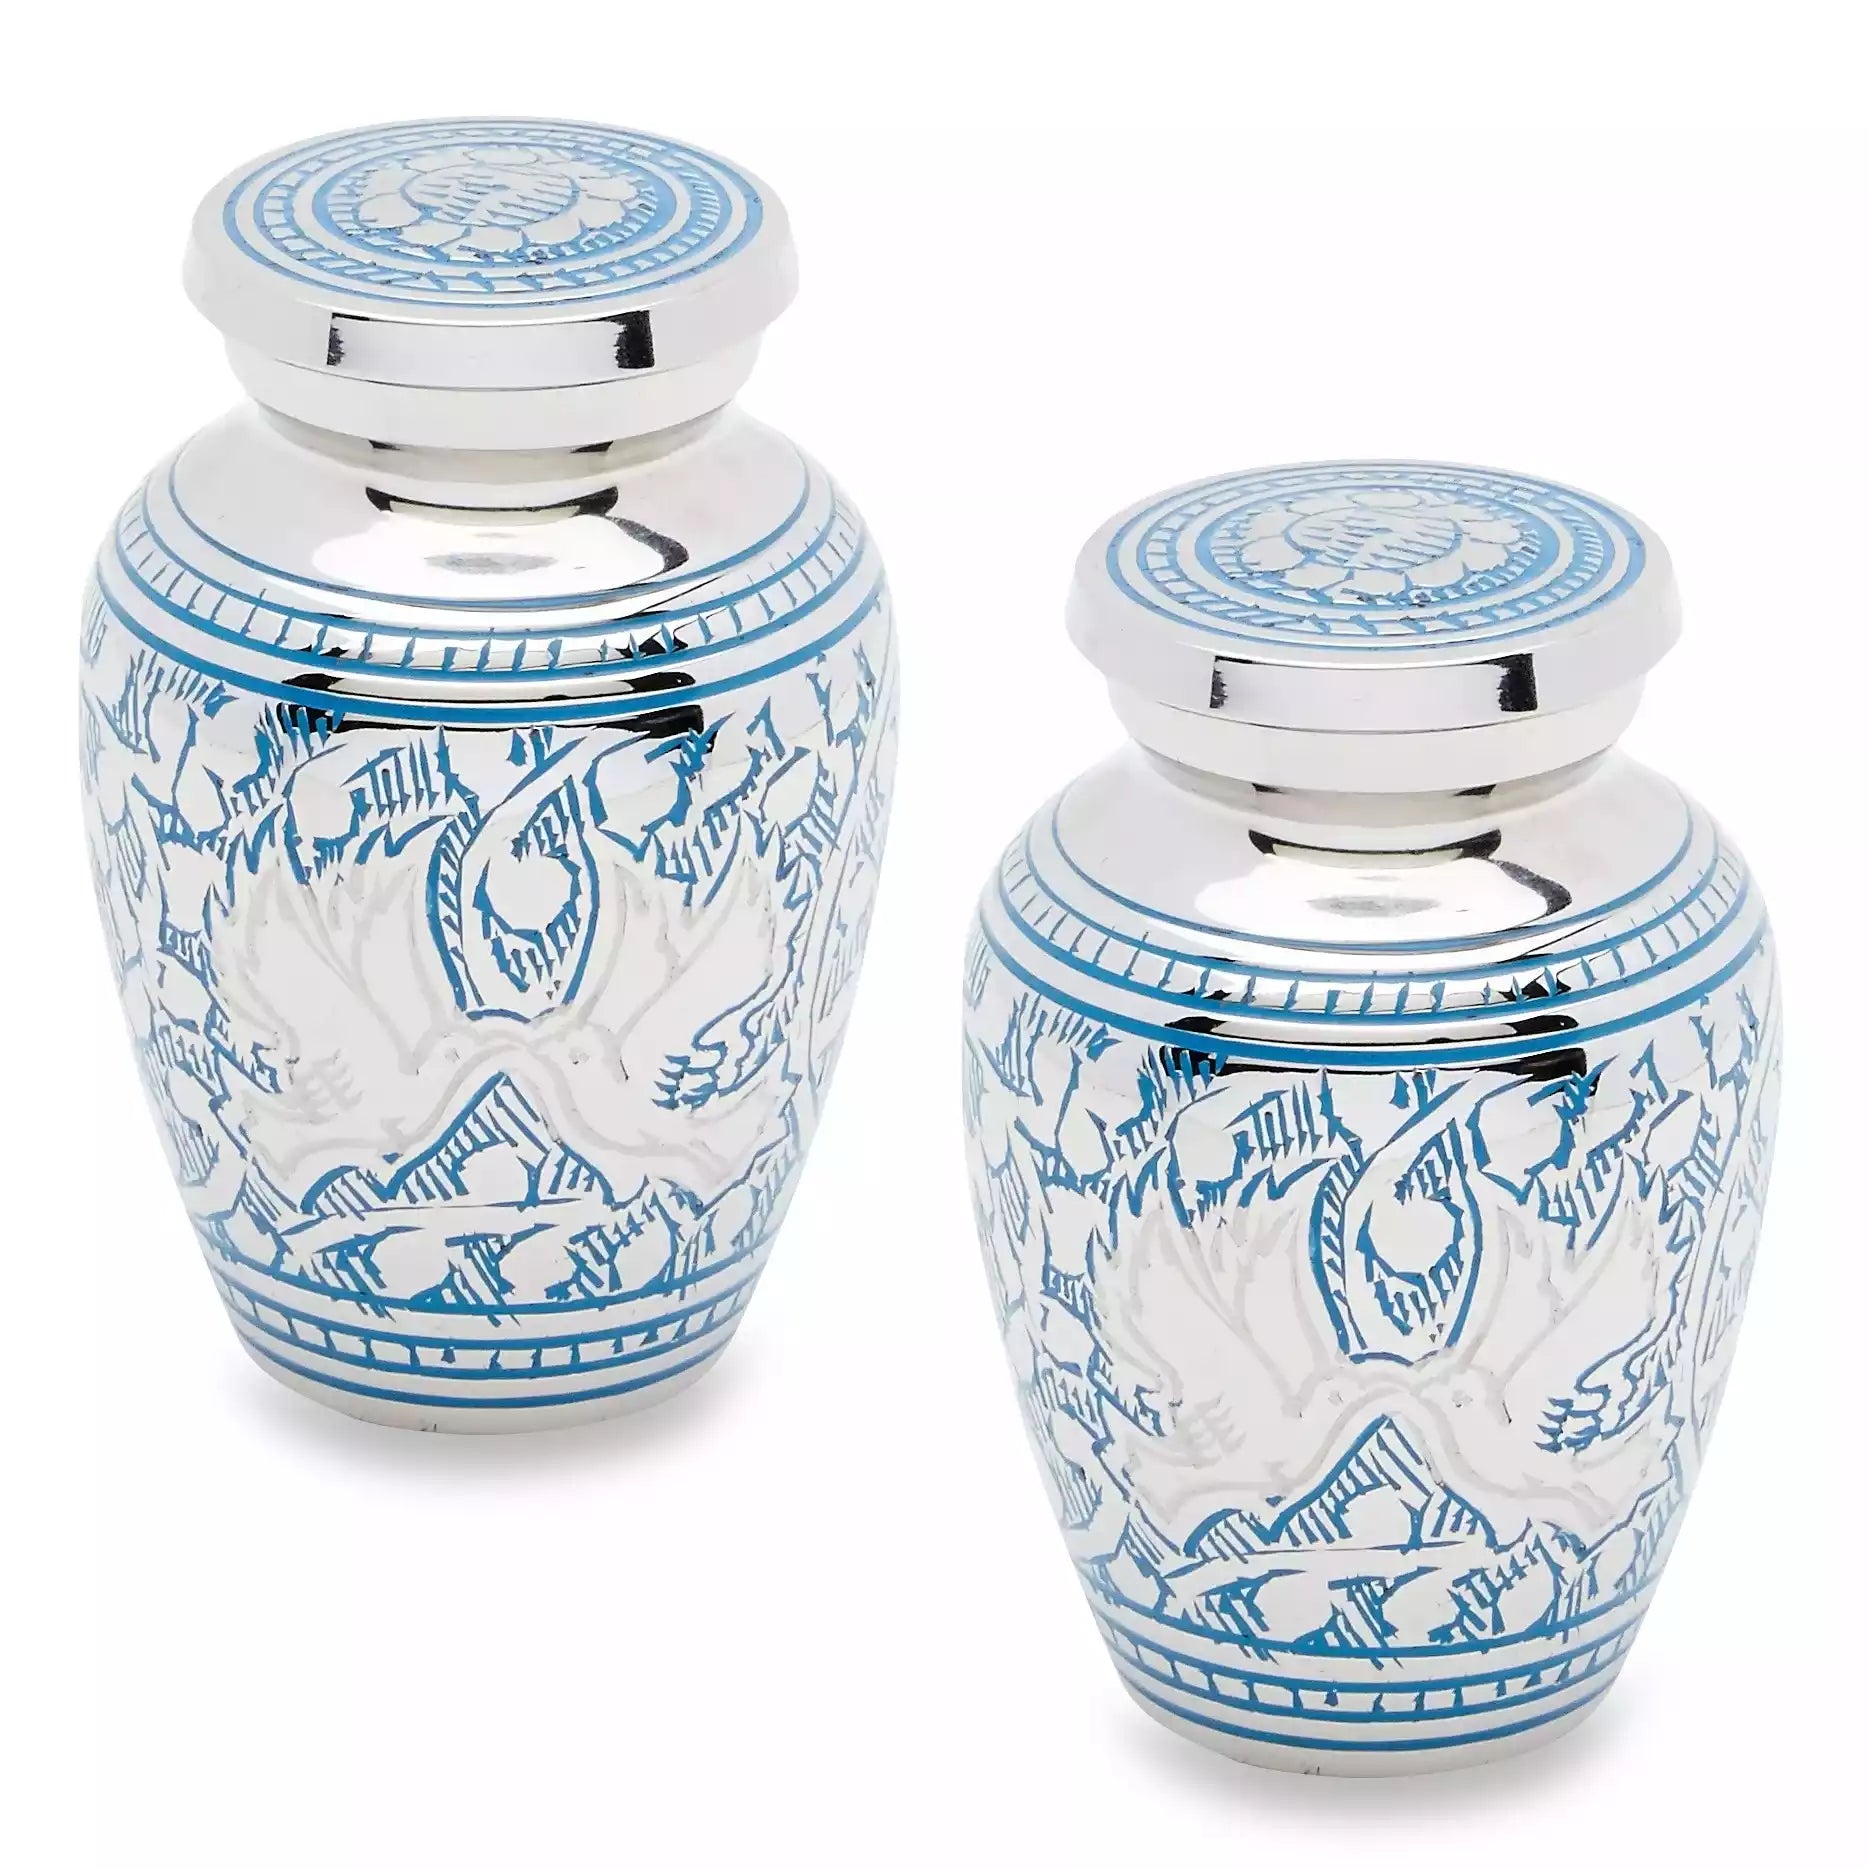 Pet Cremation Urns with Memory Keepsake Compartments: Storing Mementos and Tokens